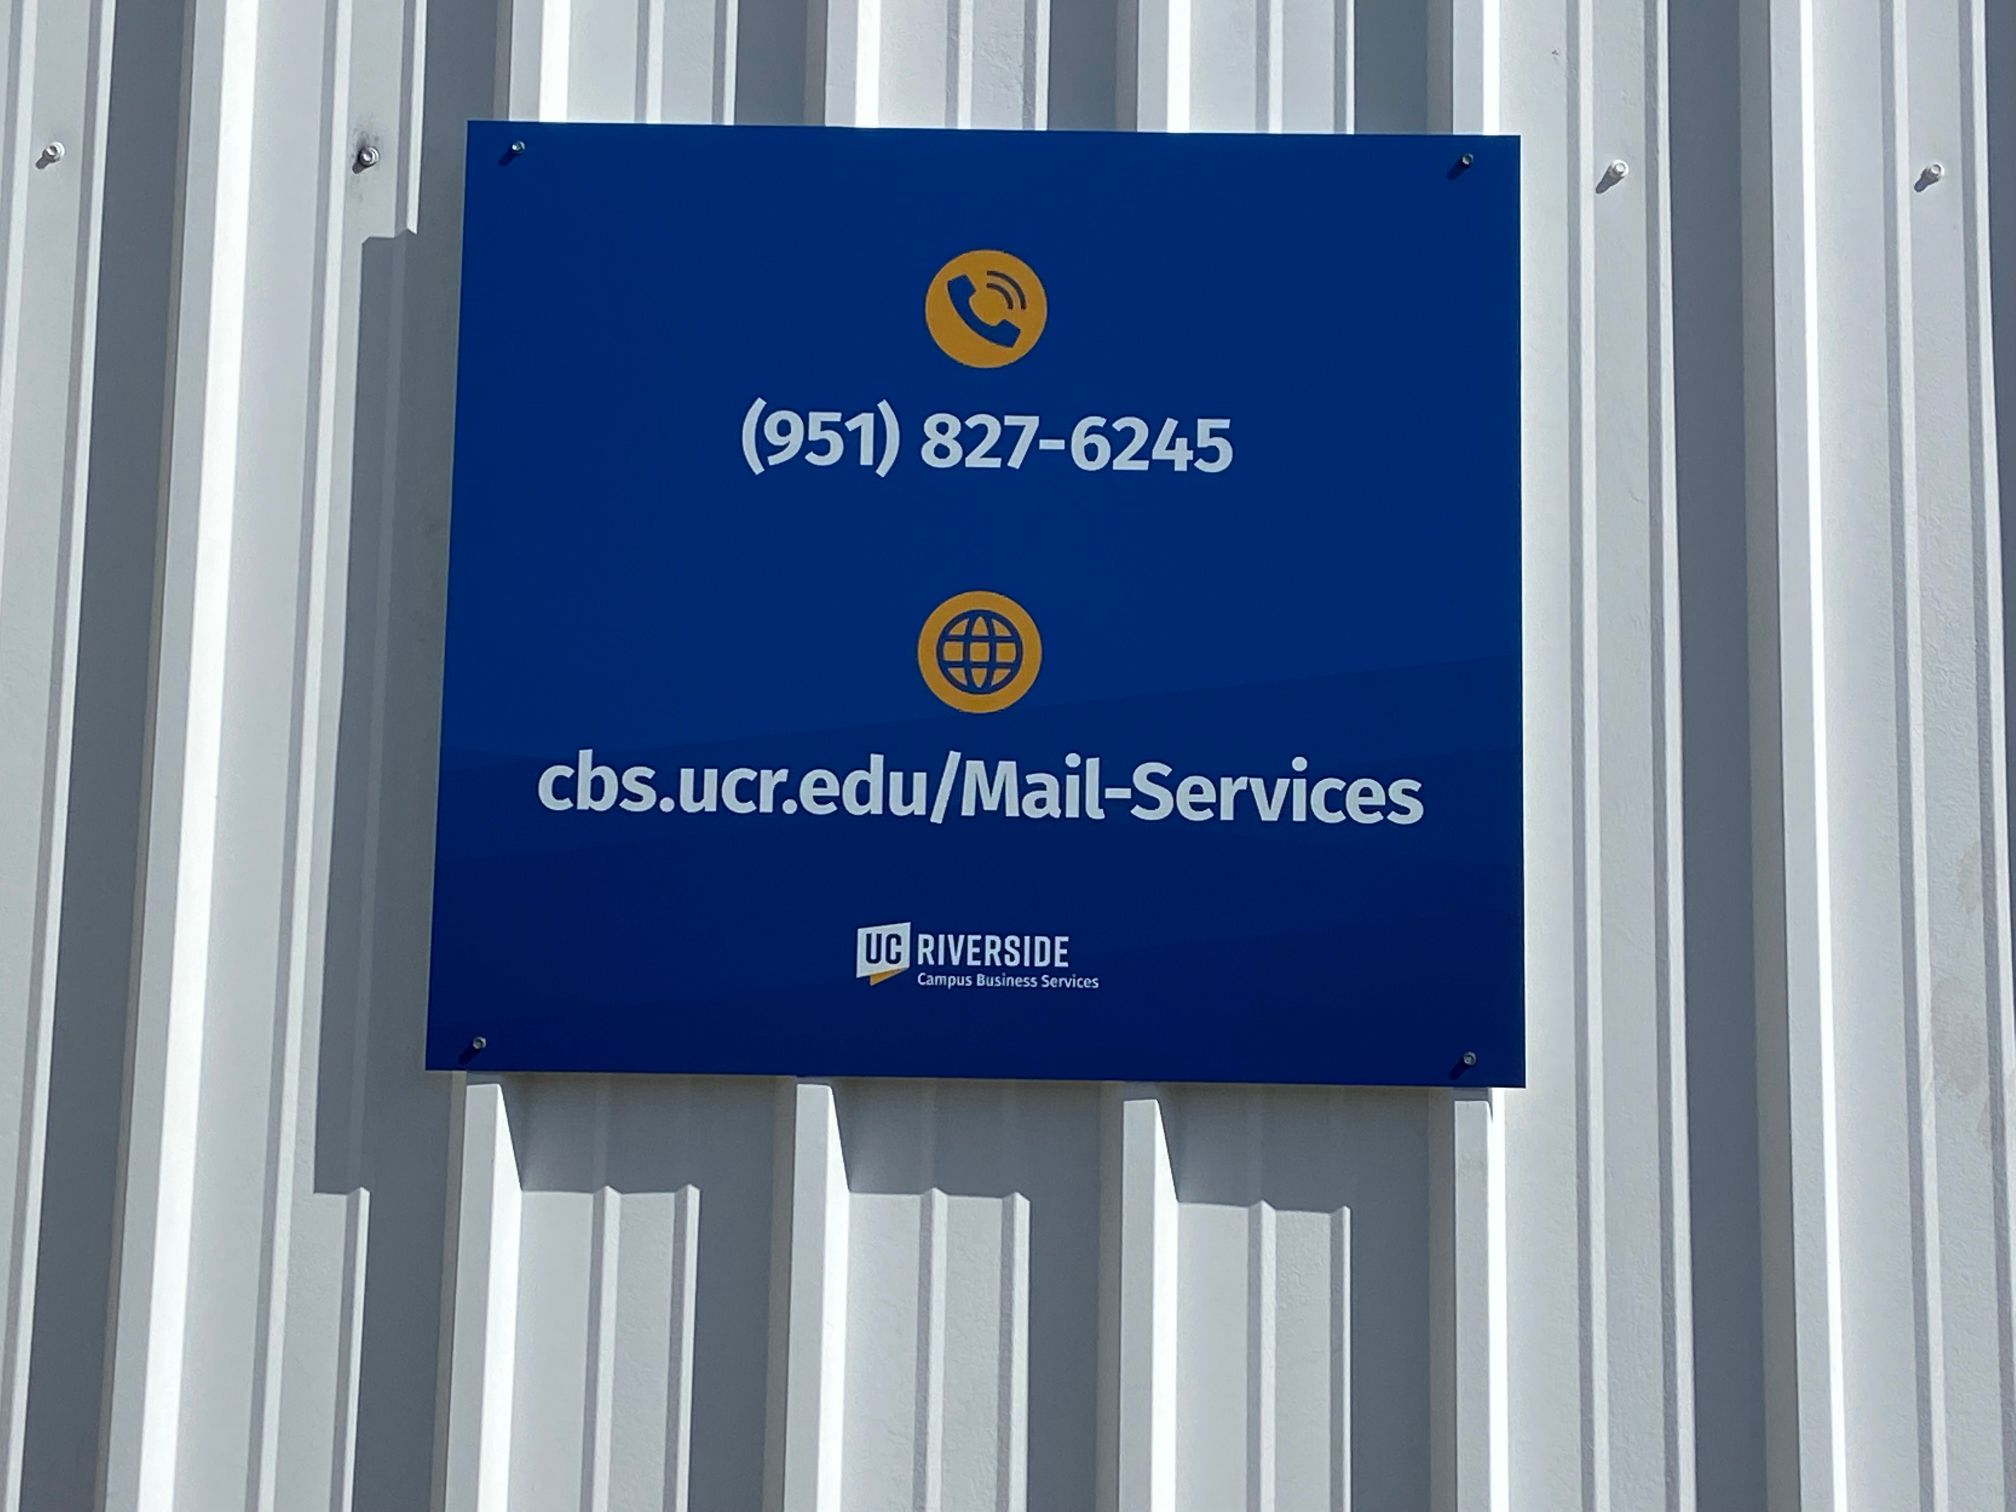 New Facility Signs for UCR  in Riverside Direct Visitors and Guests